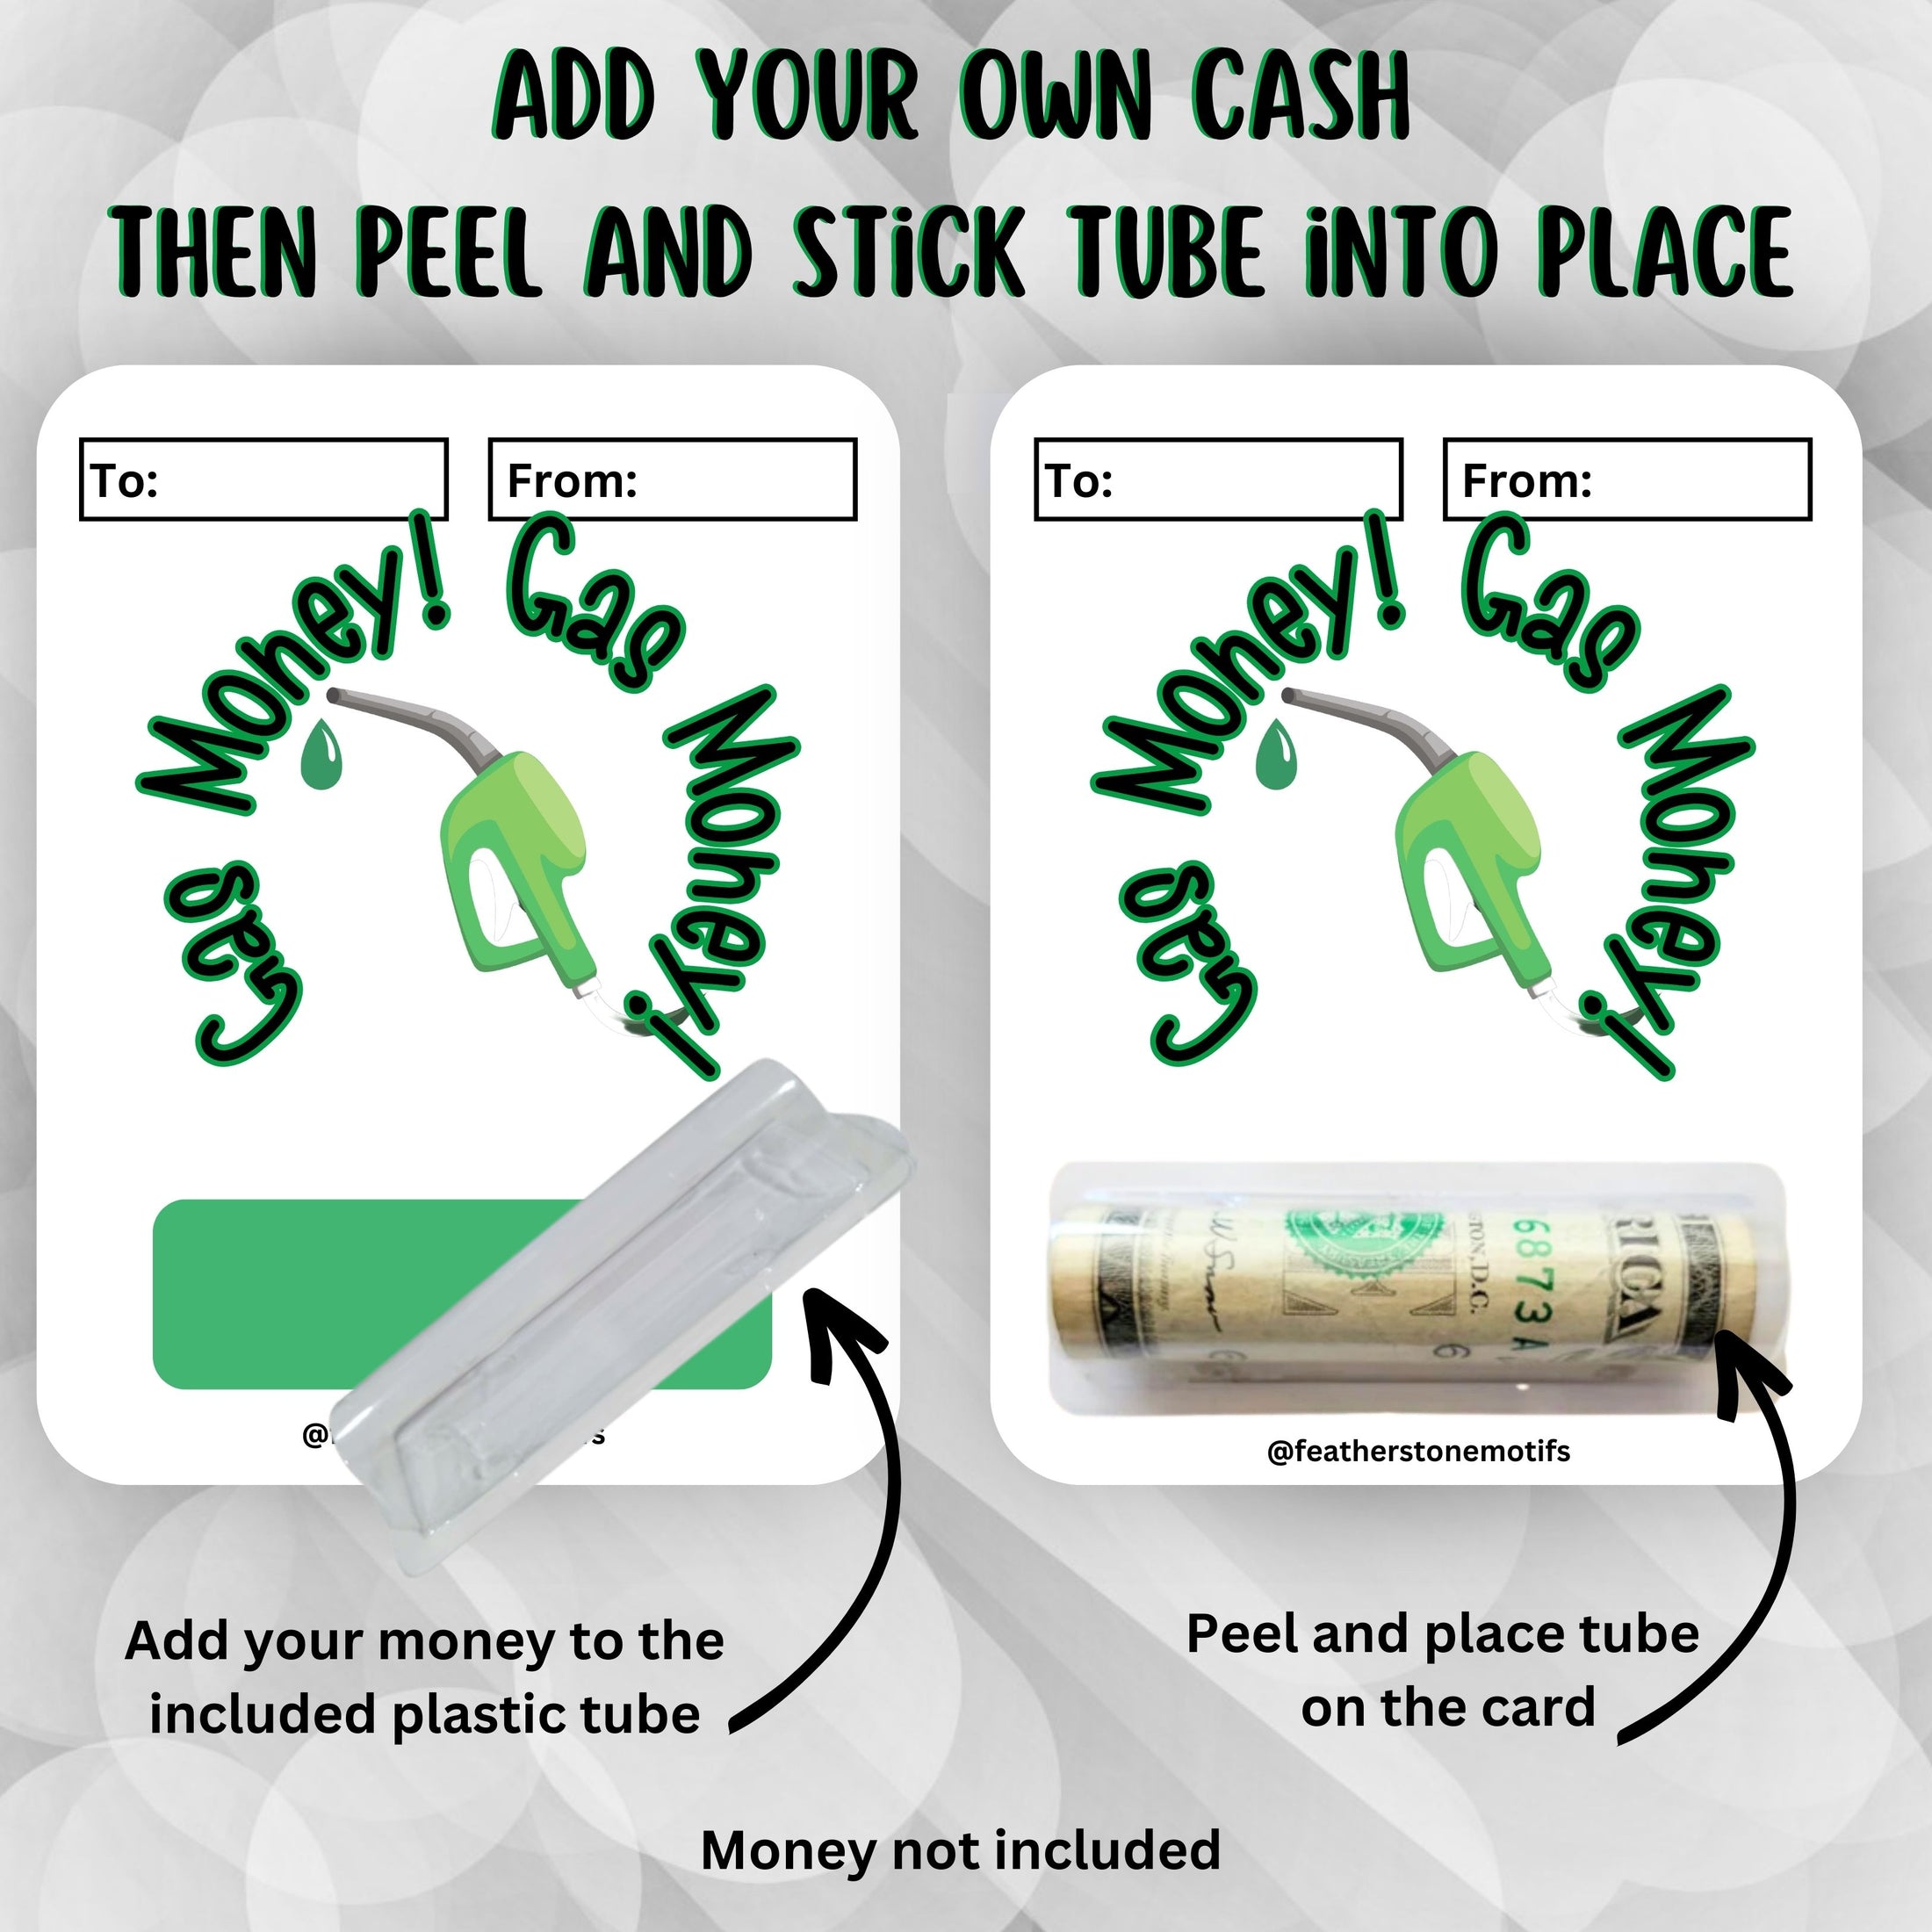 This image shows how to attach the money tube to the Gas Money 2 Money Card.